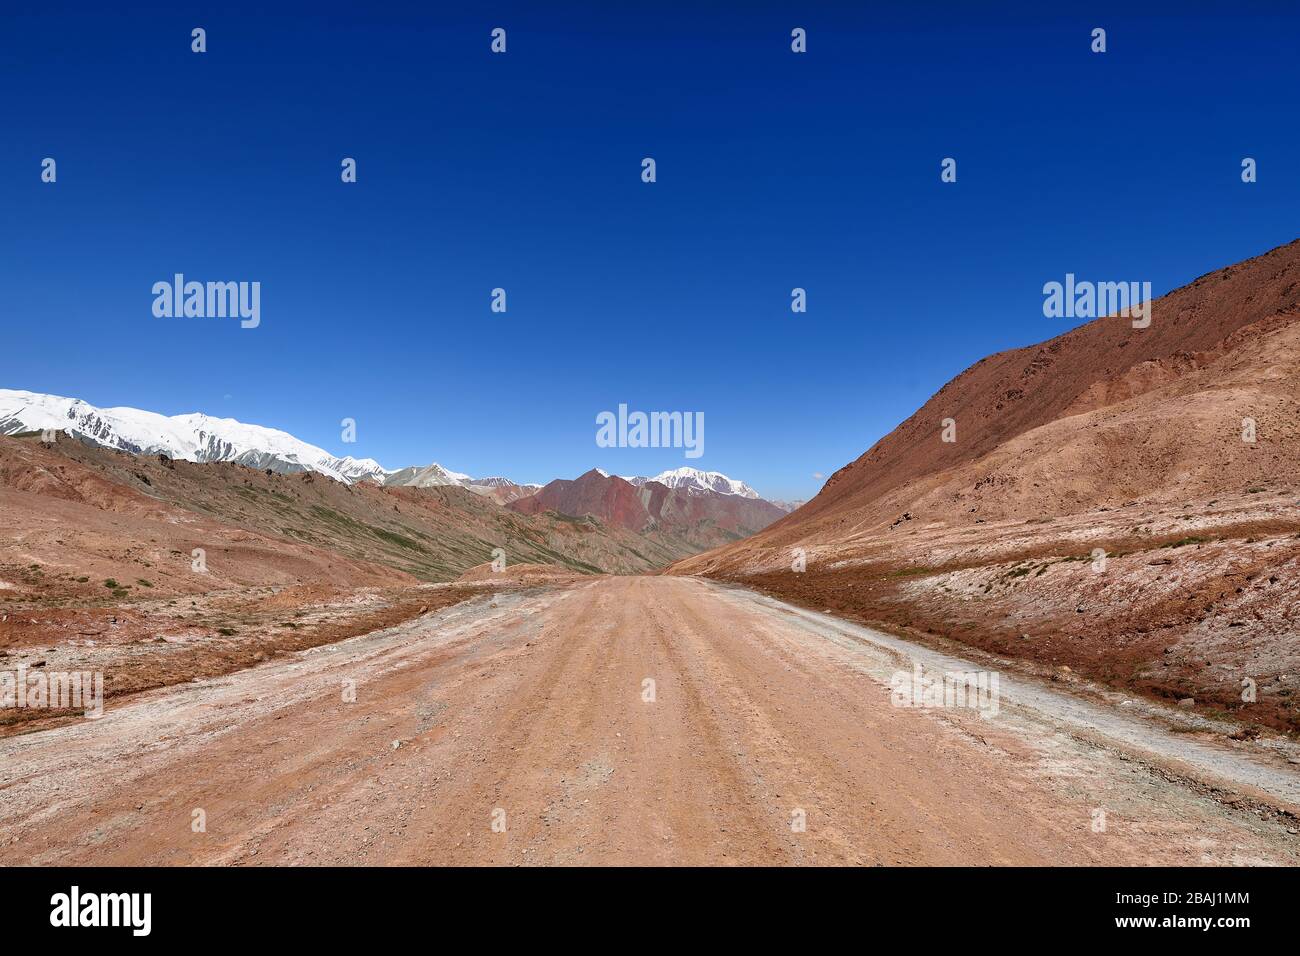 Views from the Pamir Highway, second highest road in the world, Pamir mountains, Tajikistan, Central Asia   silk road, endless, scenery, road, blue, r Stock Photo